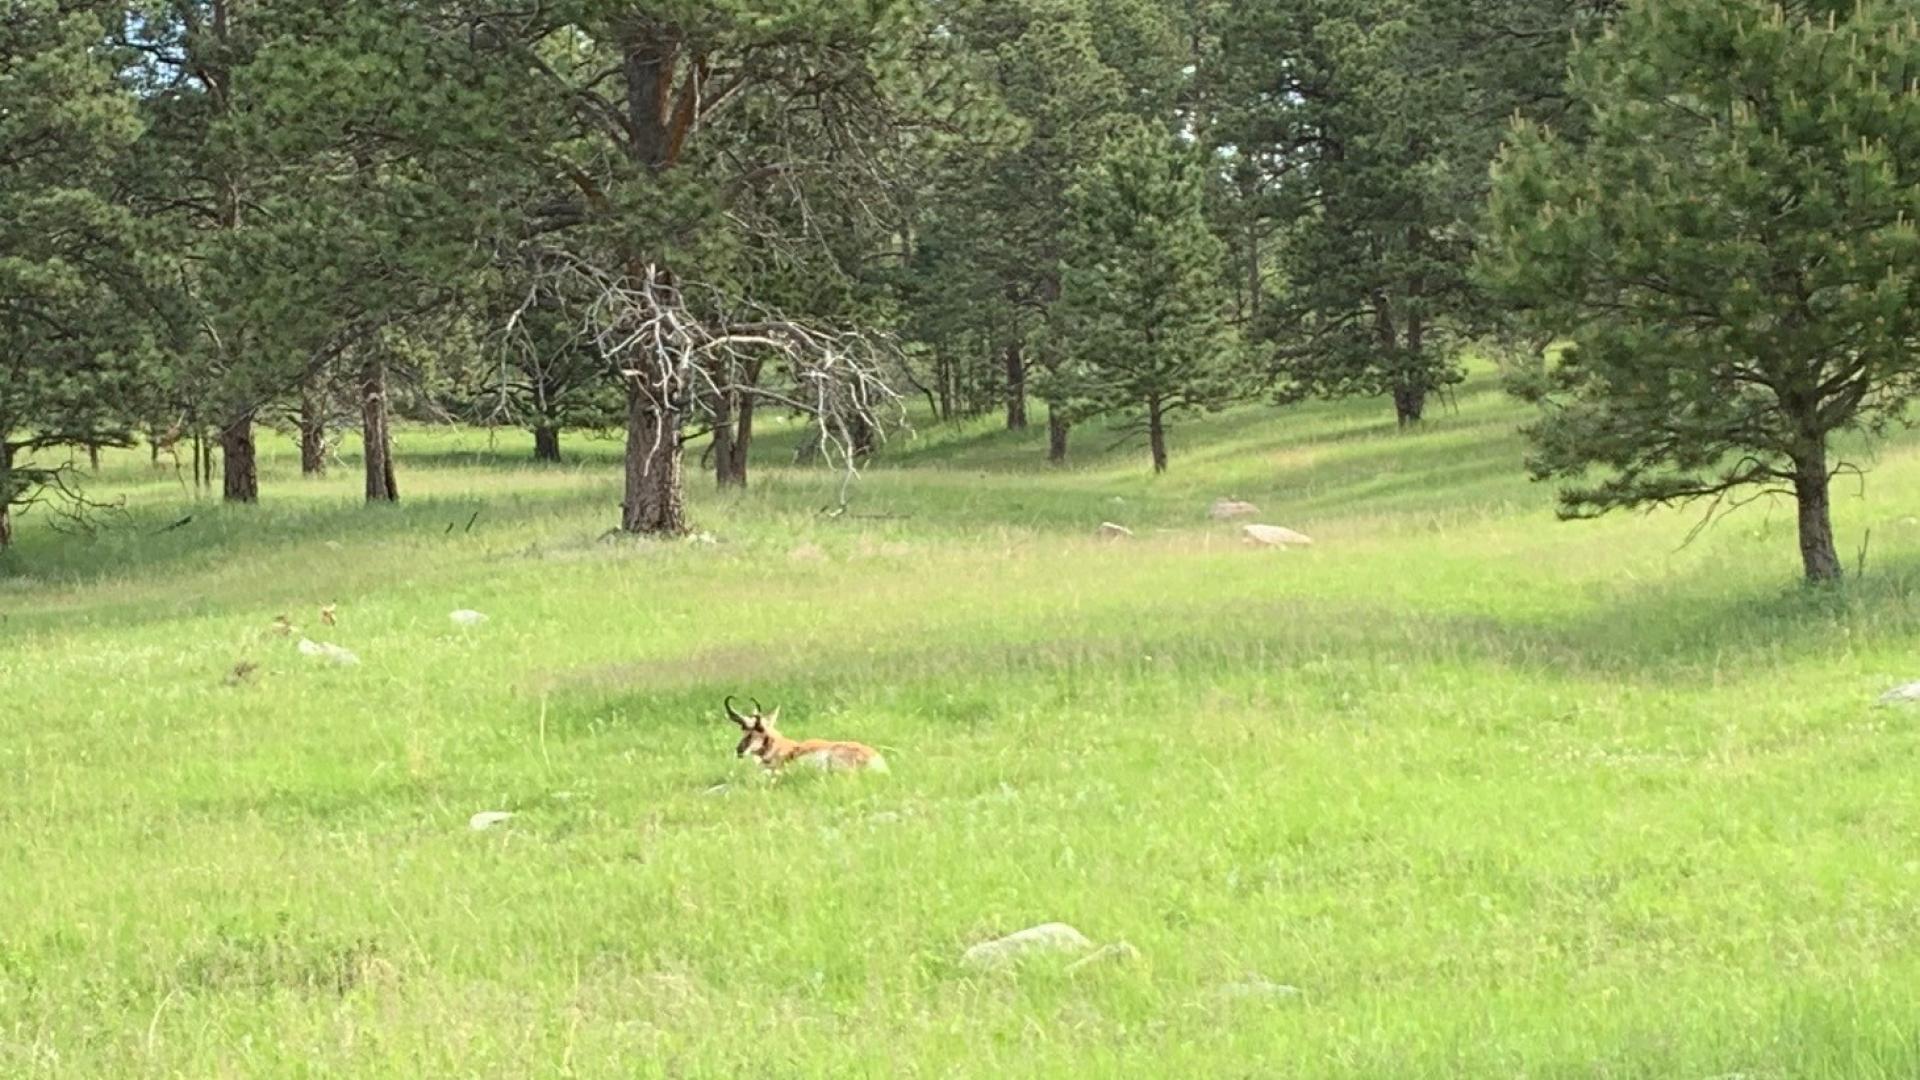 Antelope bedded down in grass - SD